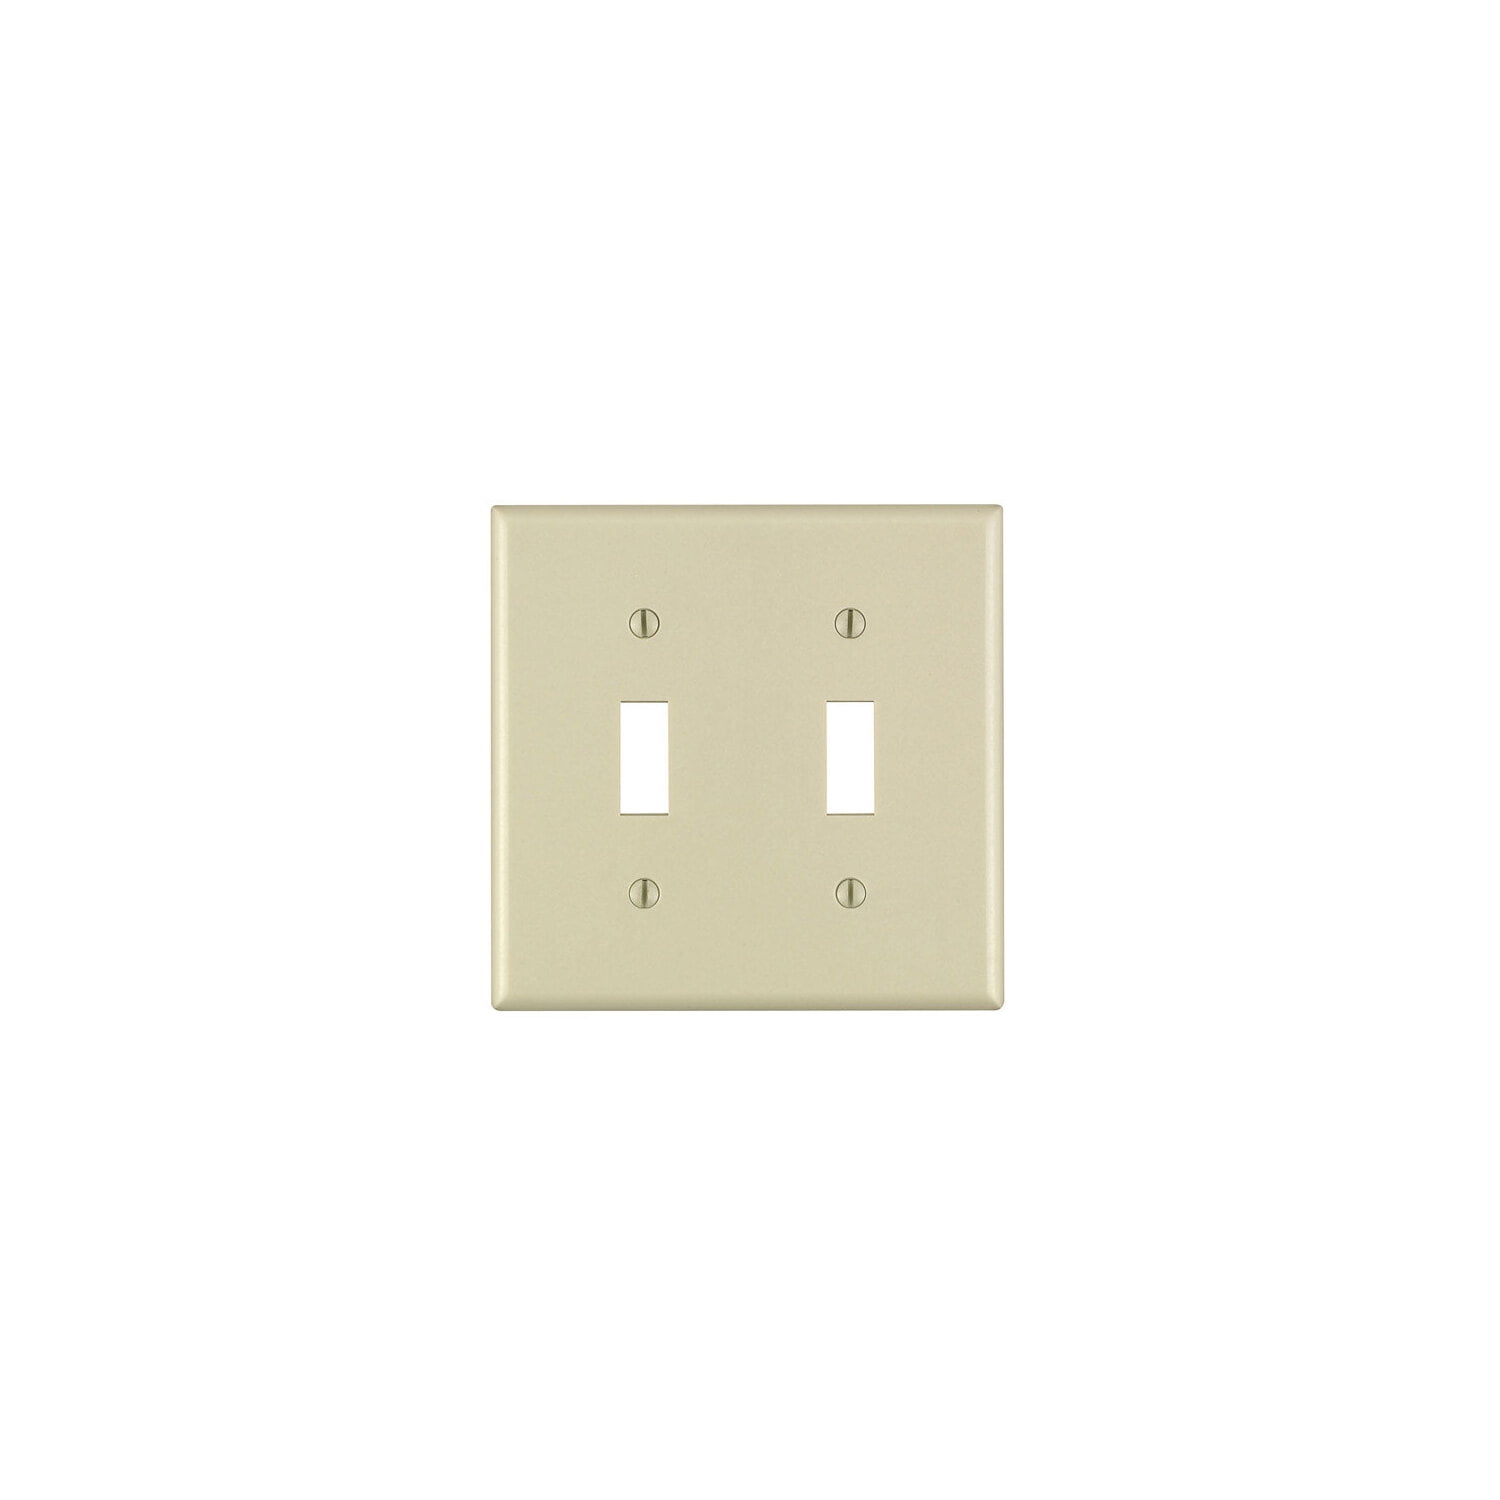 2 Leviton Almond UNBREAKABLE 2-Gang Switch Cover Wallplates Switchplate 80709-A 